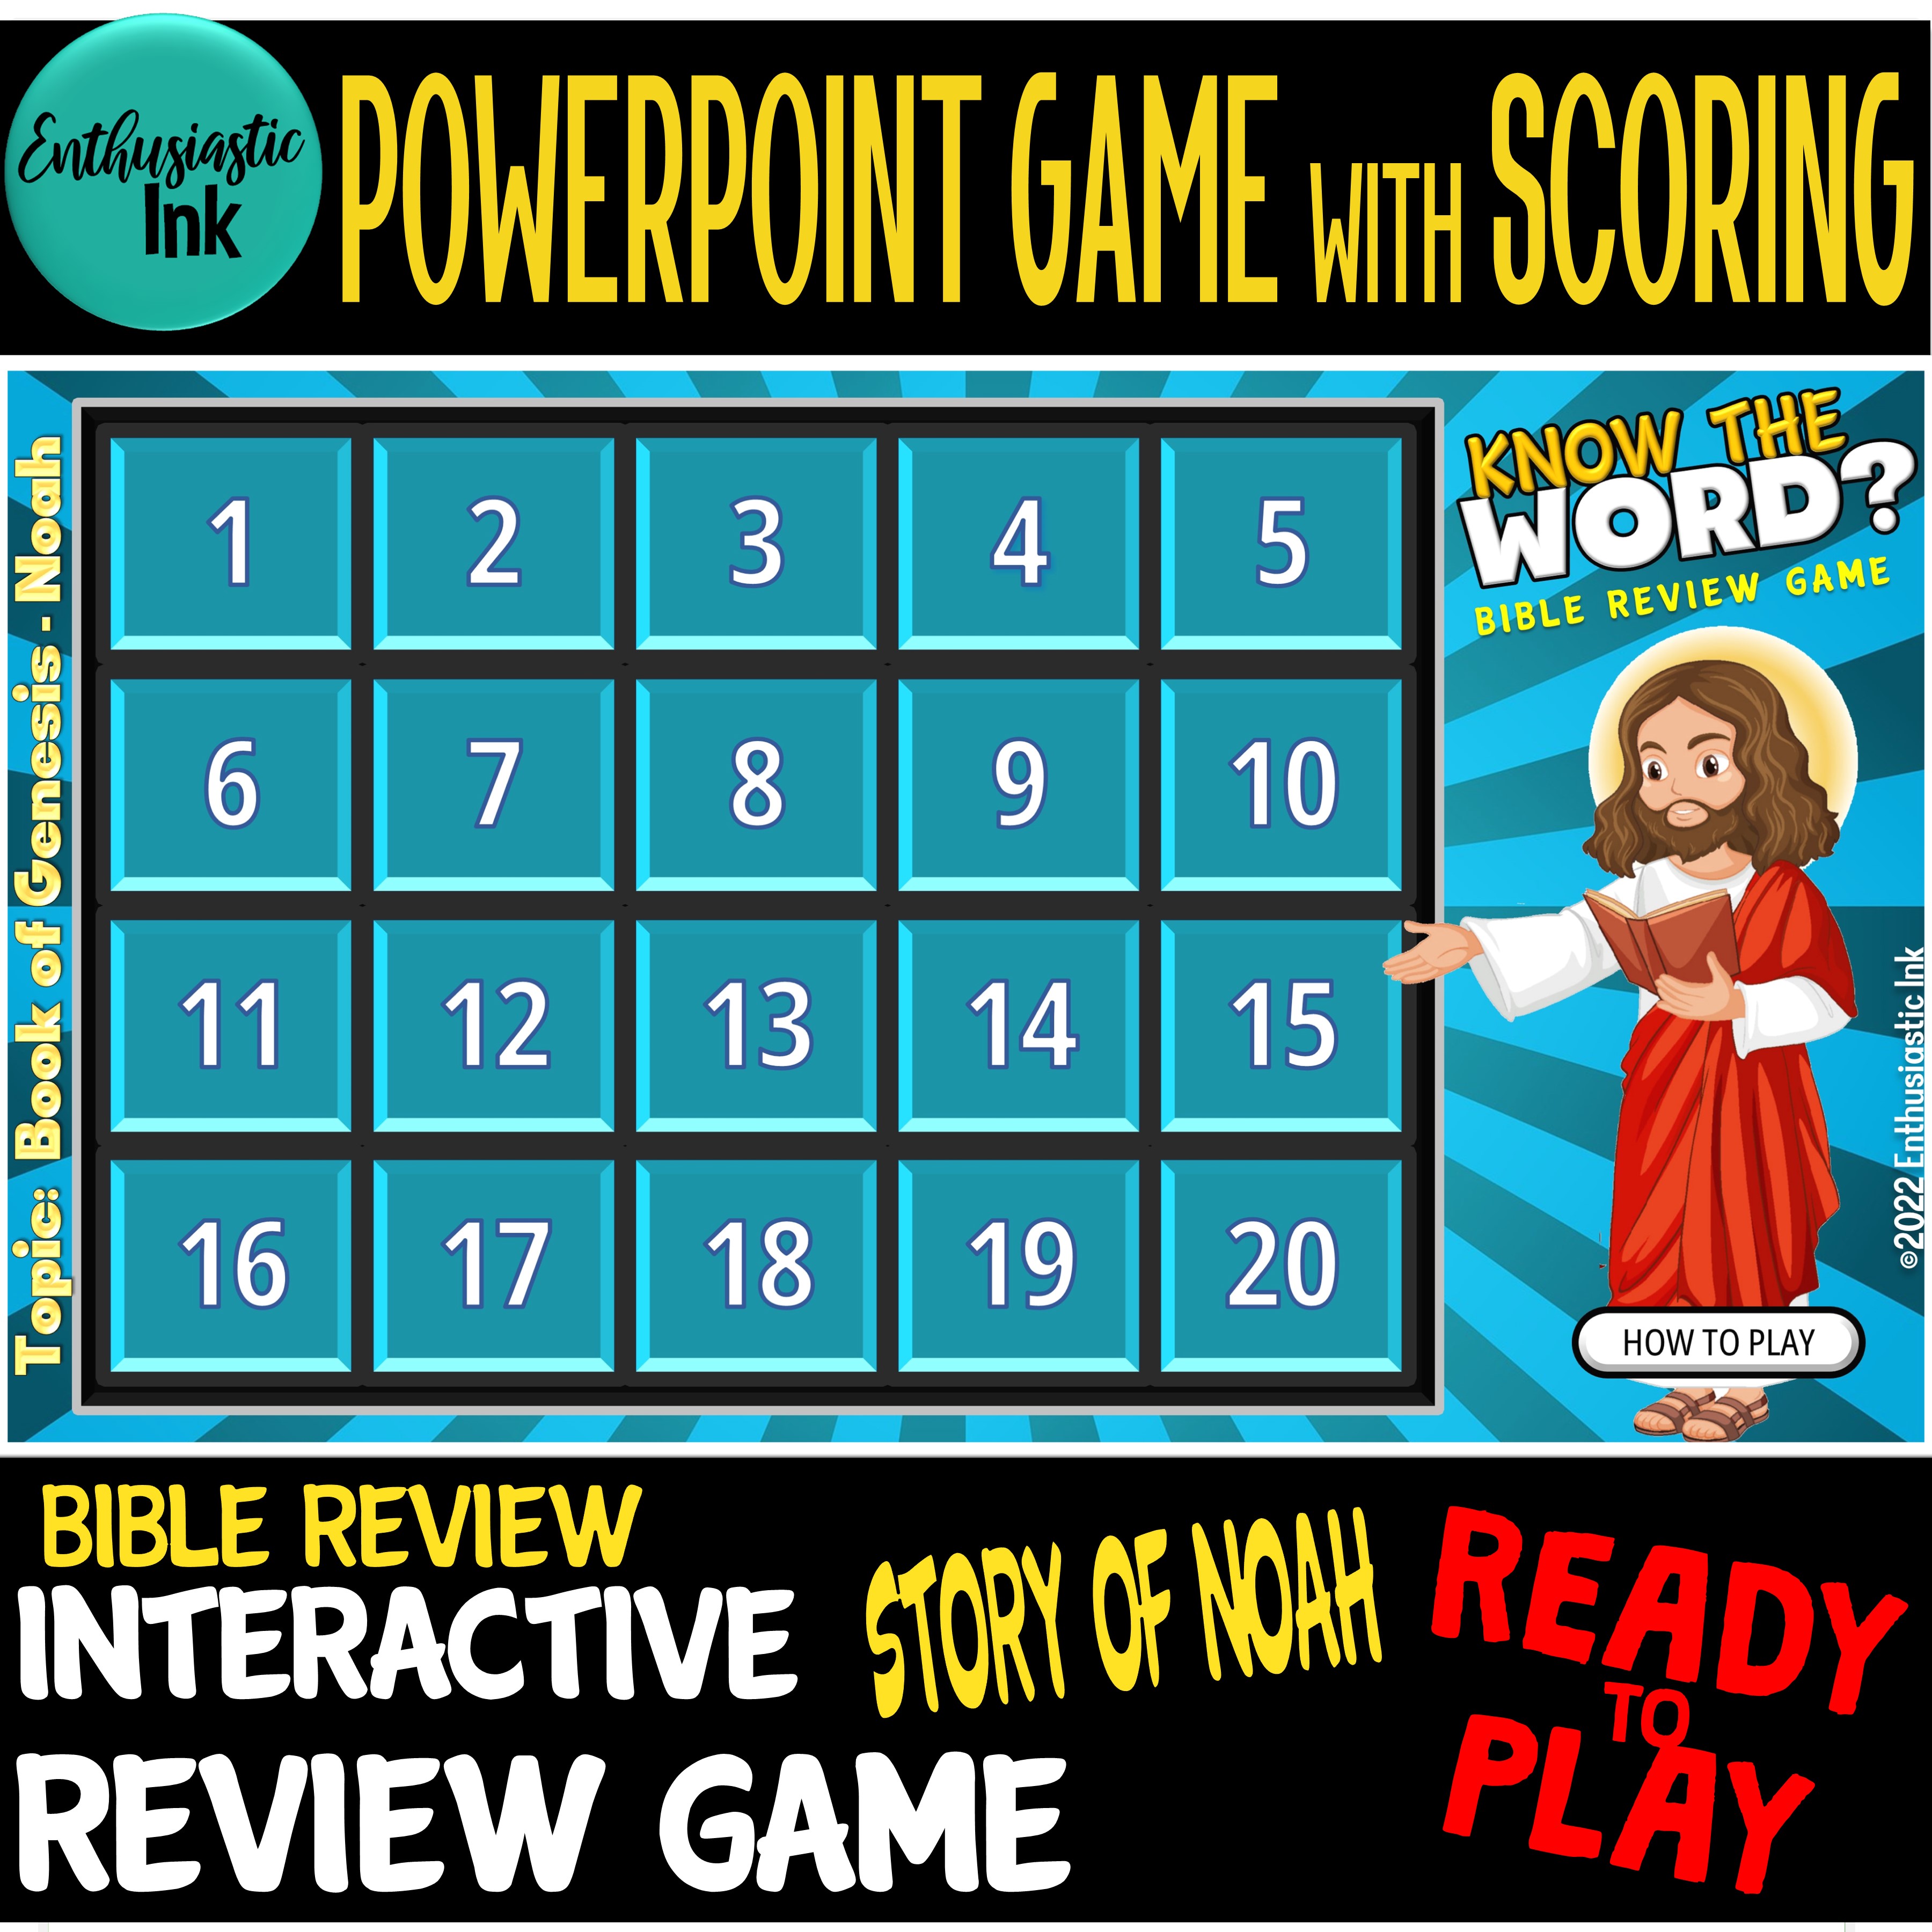 KNOW THE WORD? BIBLE REVIEW GAME -NOAH